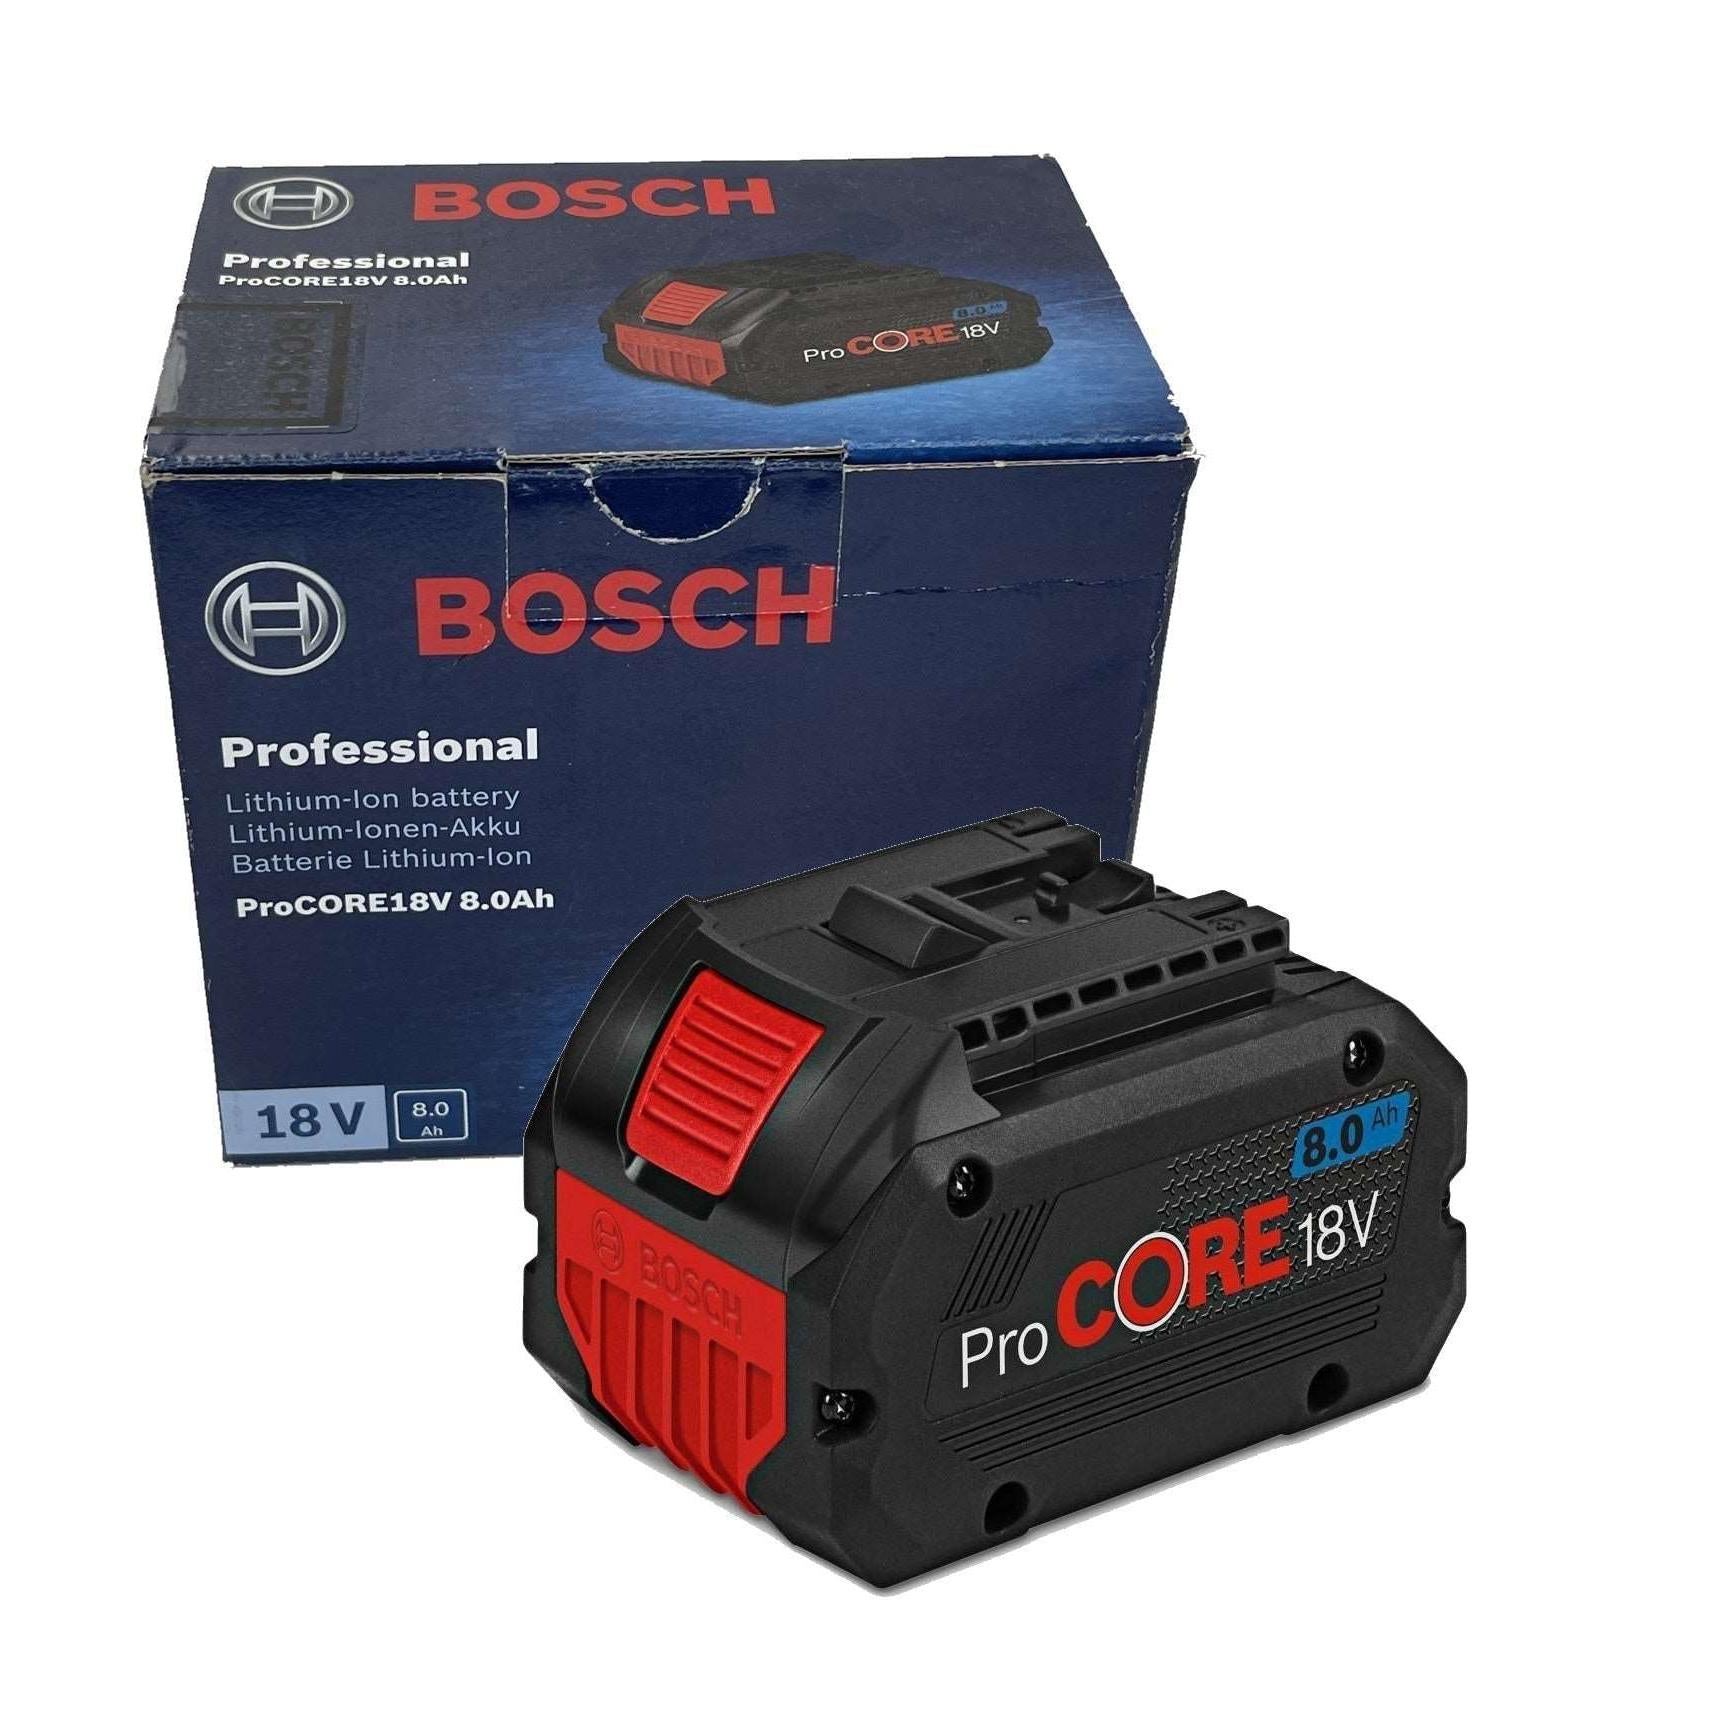 Bosch Professional Battery Pack ProCORE 18V 8.0Ah 1600A016GK Power Tool Services